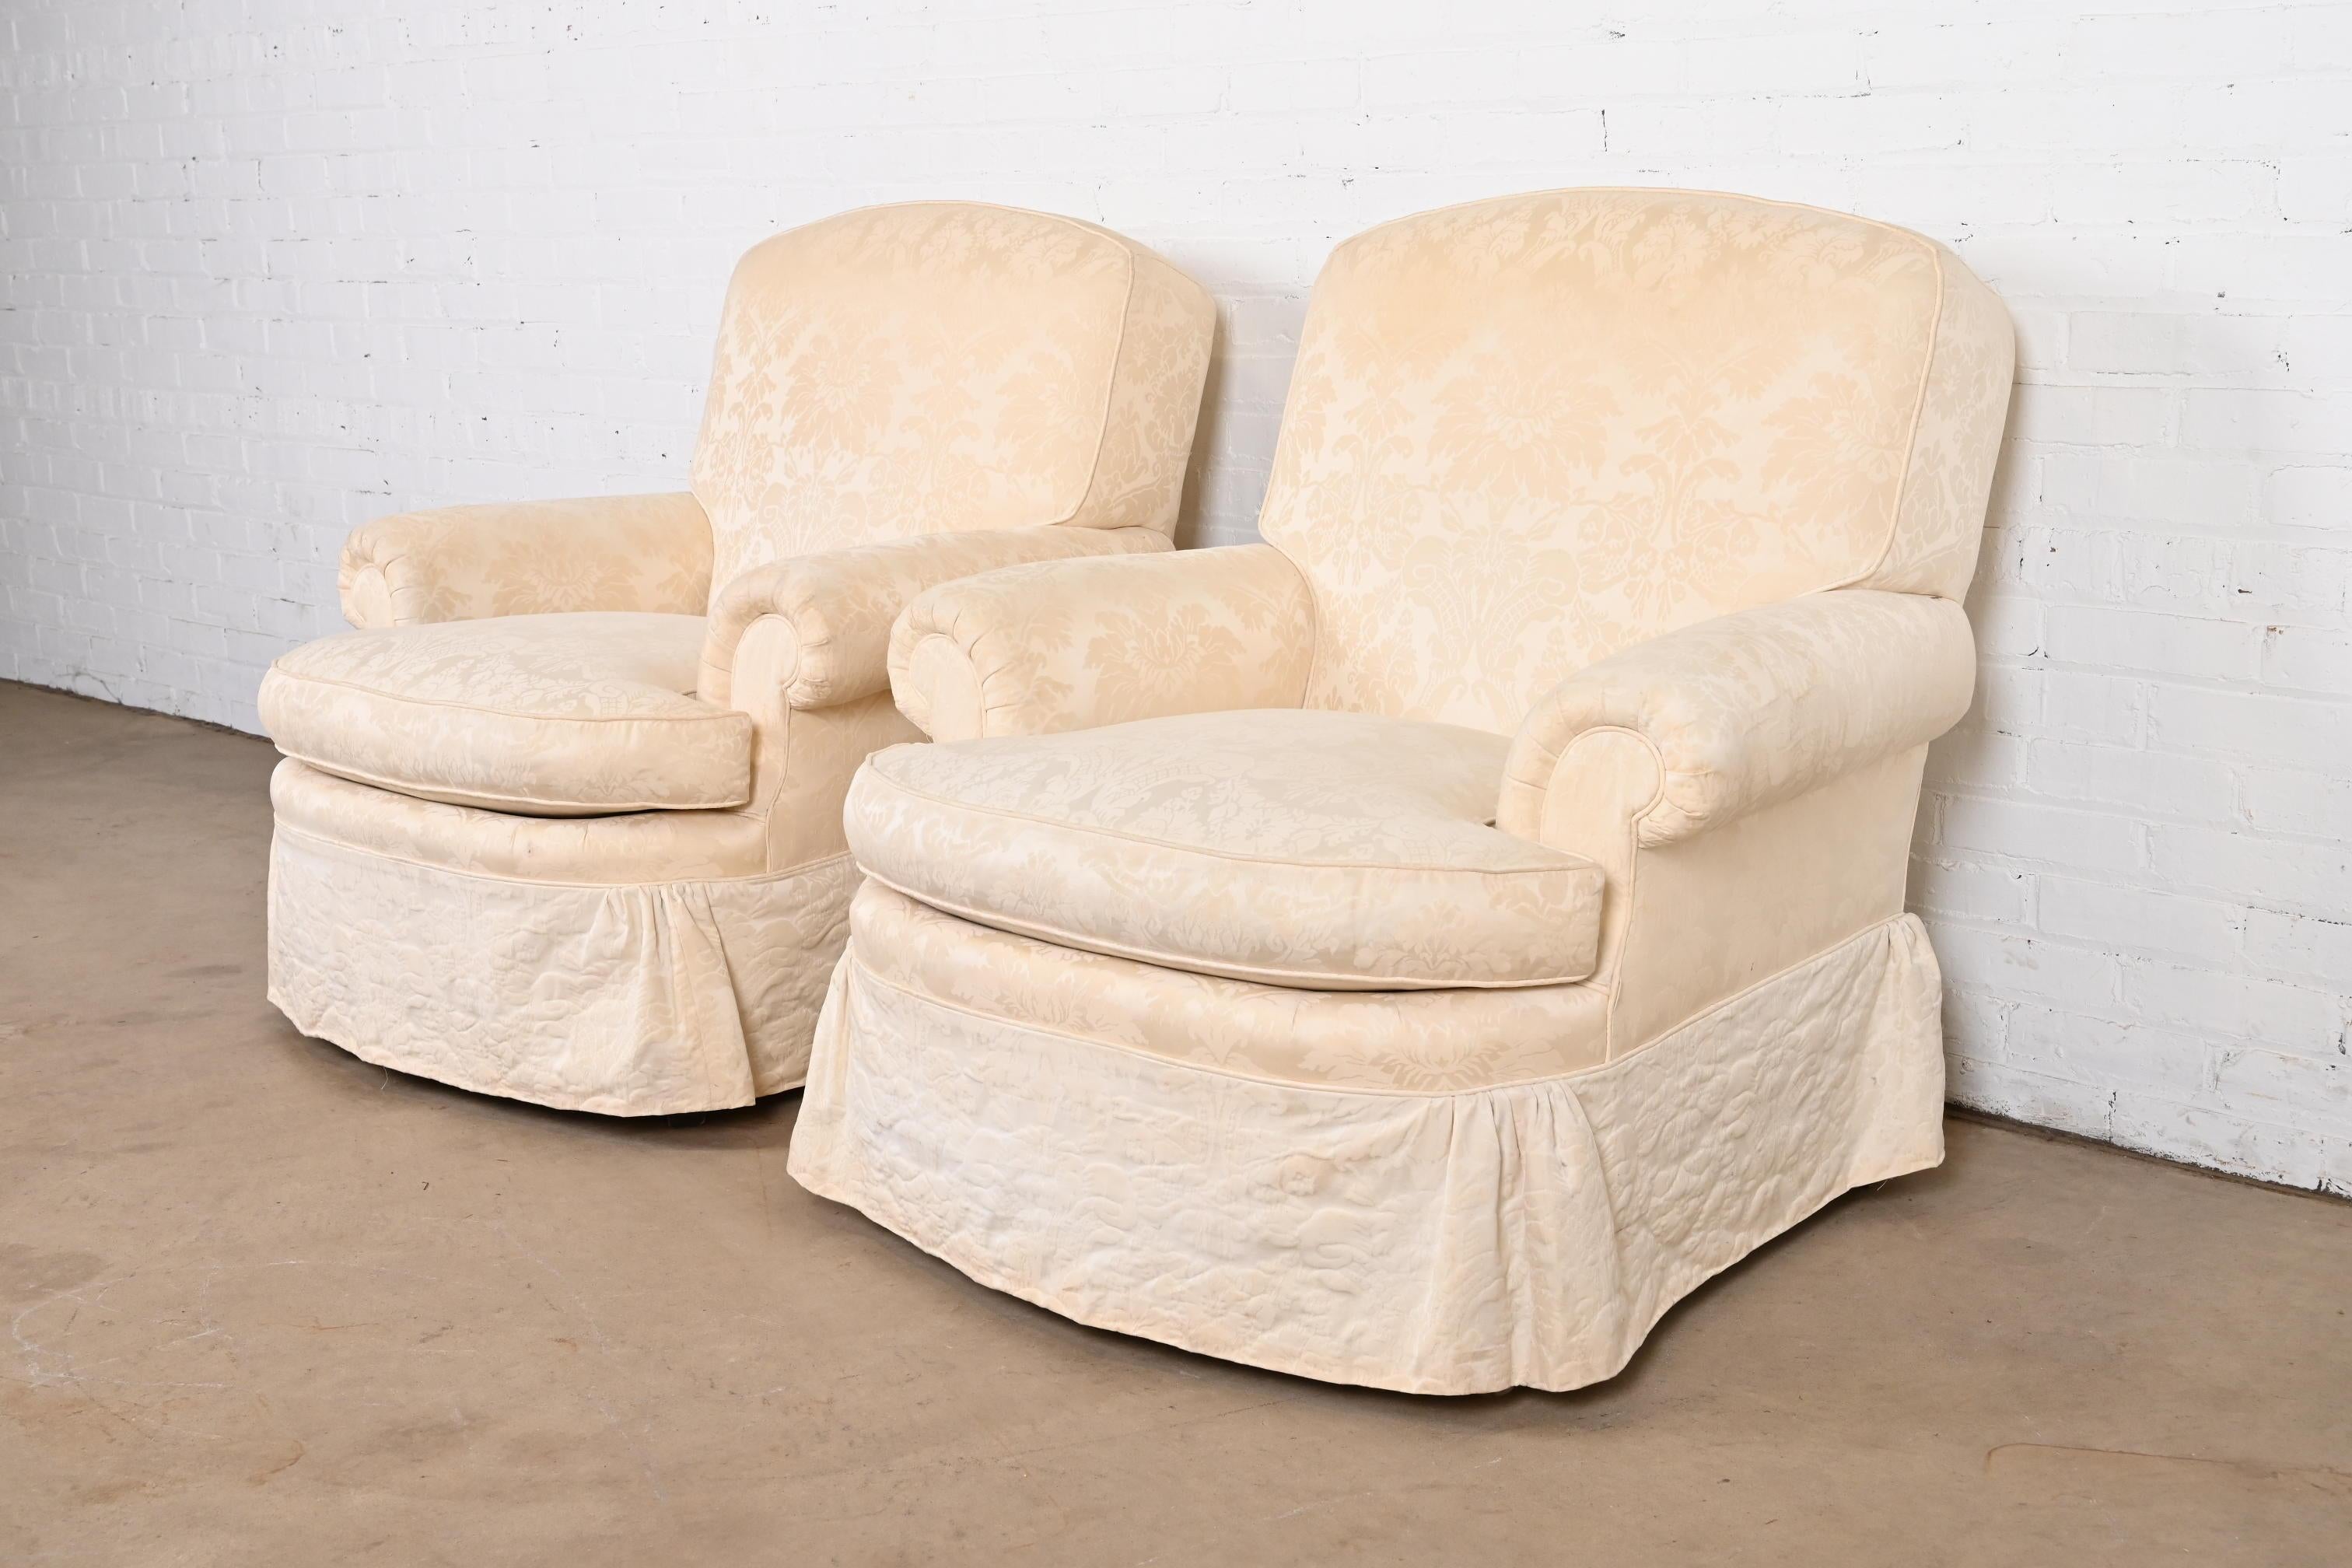 20th Century Baker Furniture Damask Upholstered Lounge Chairs, One Chair